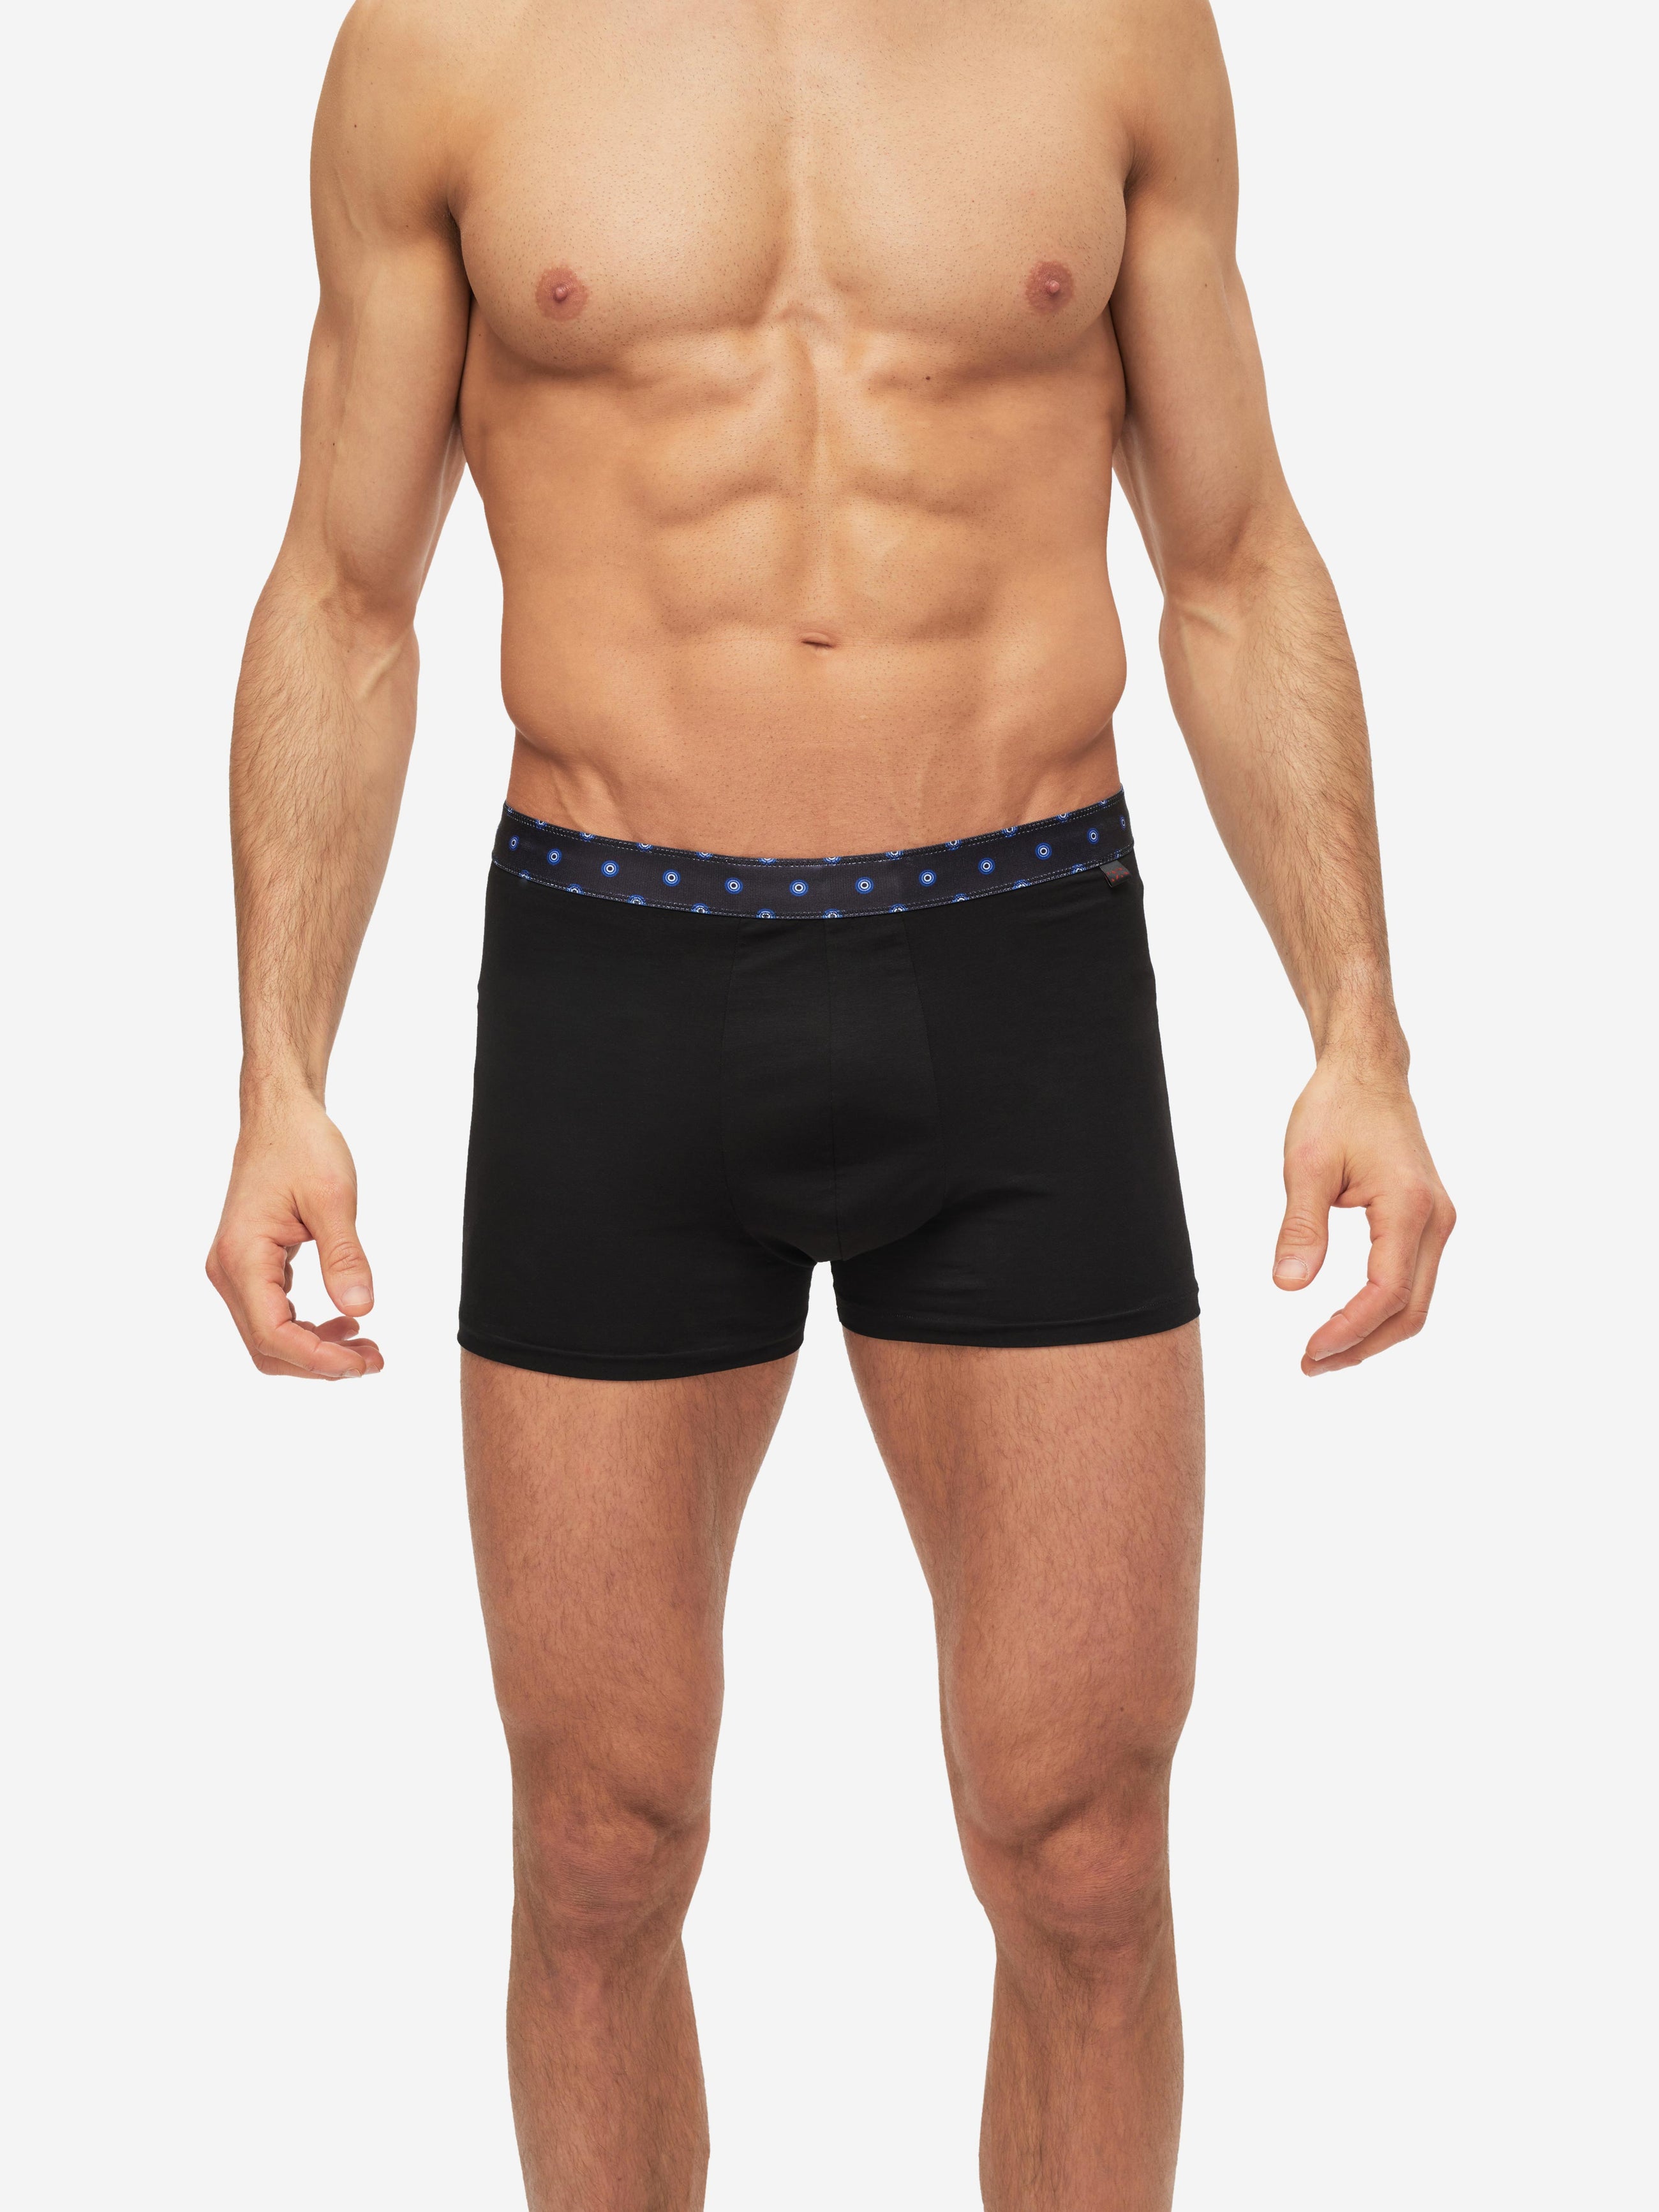 NEXT Hipsters Grey/Black Luxury Cotton Boxers Pack Of Four in